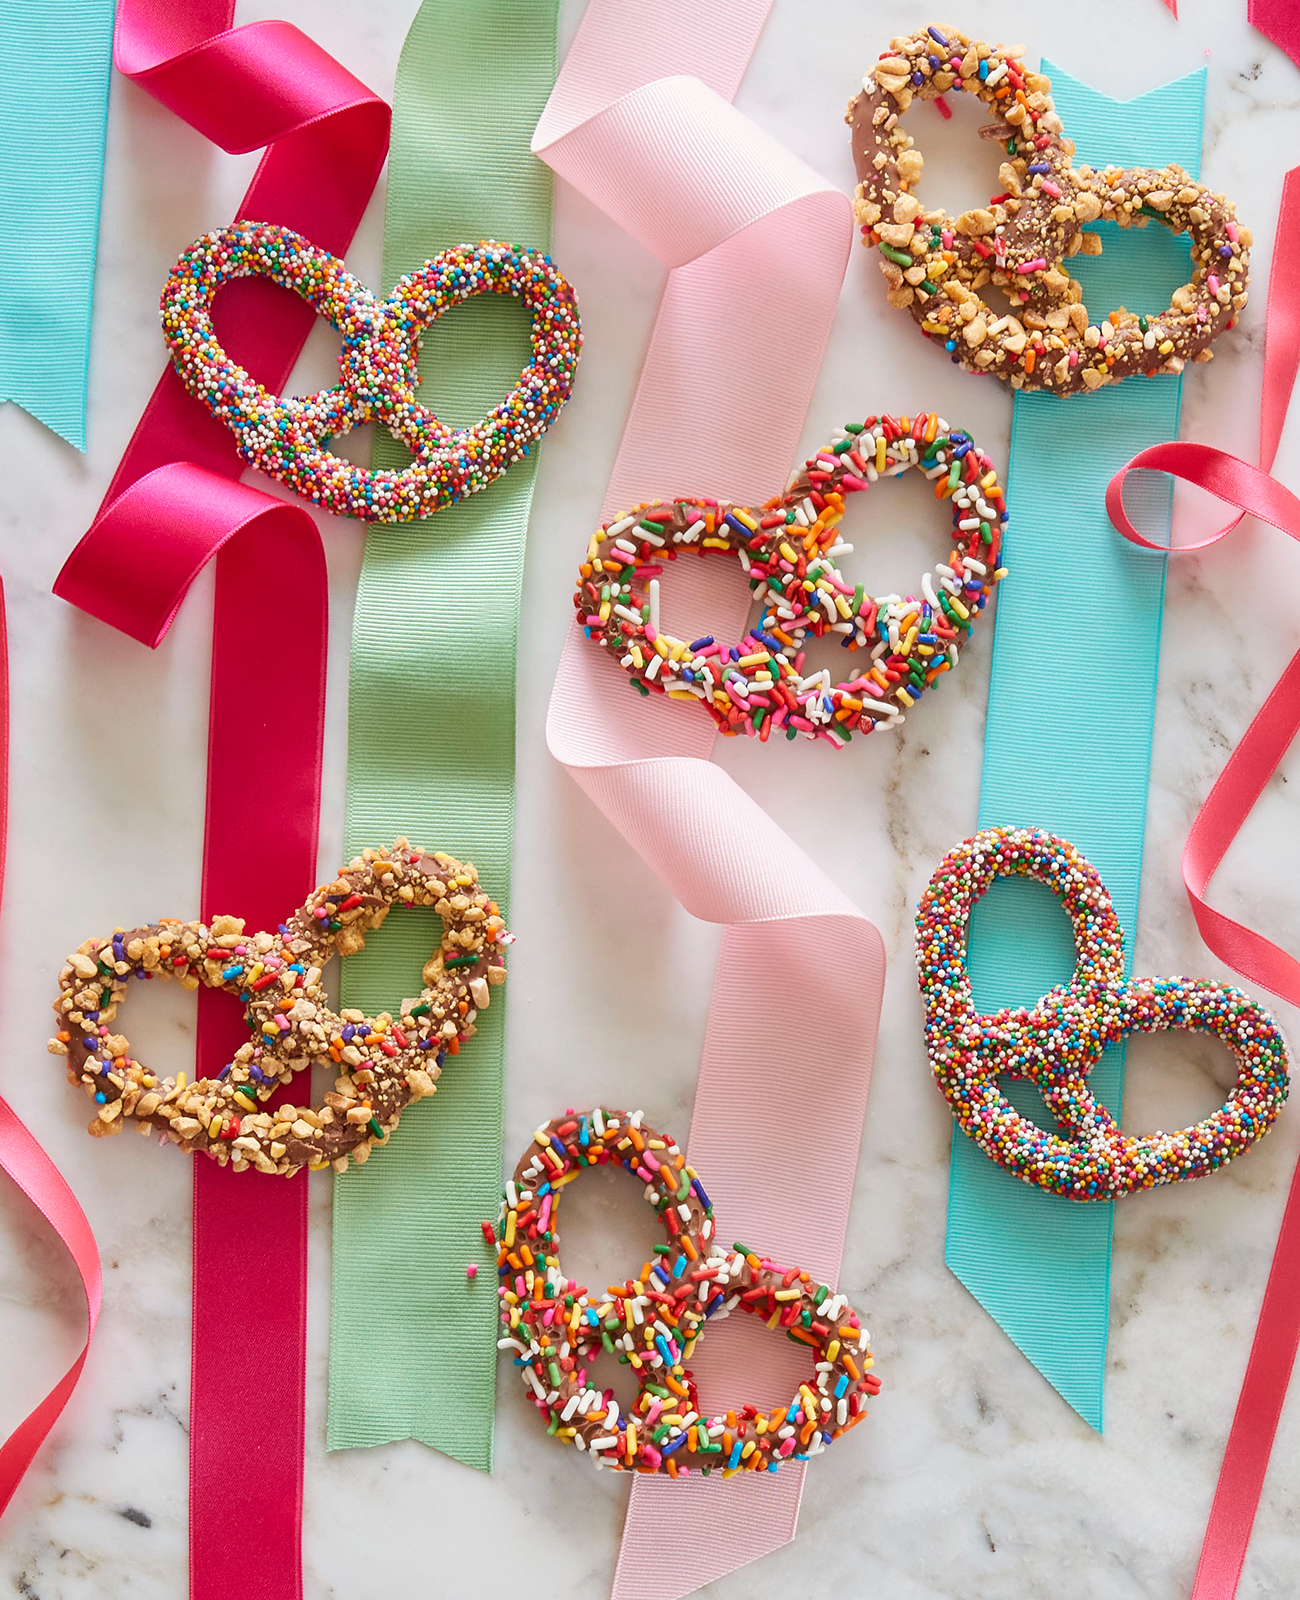 Overhead of chocolate-covered pretzels with colorful ribbon